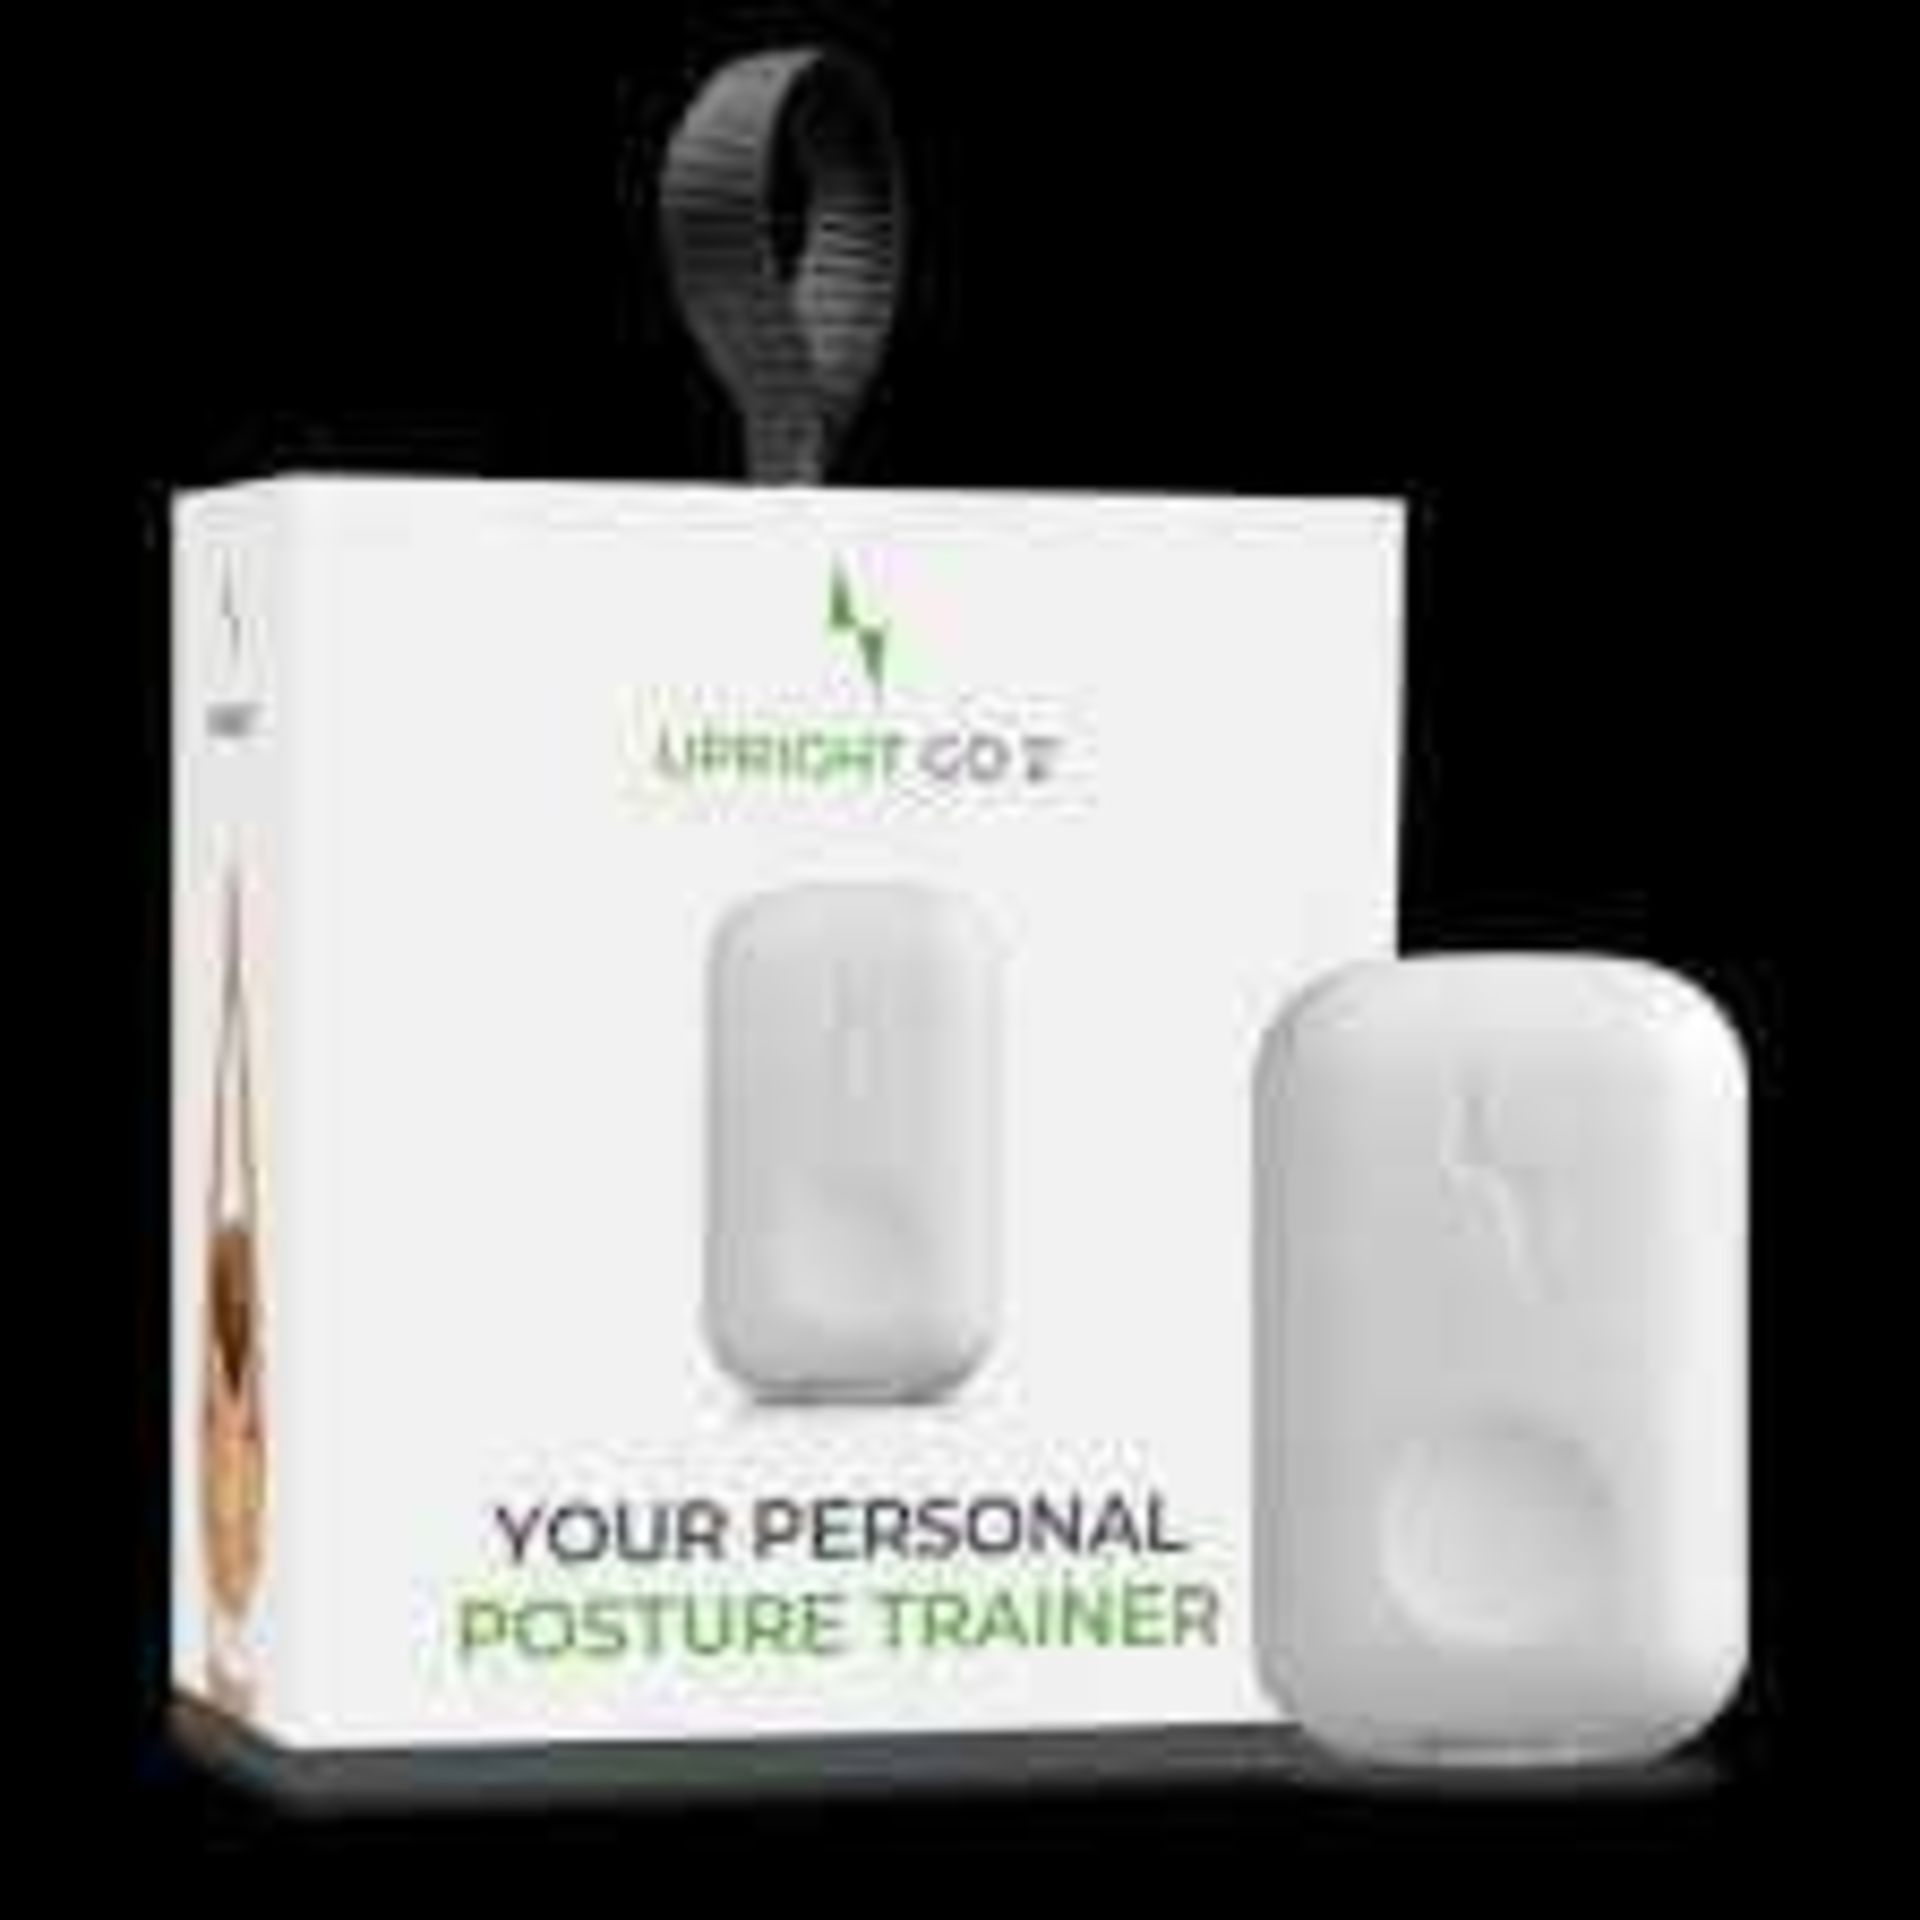 RRP £80 Boxed Upright Go 2 Your Personal Posture Trainer With Real Time Posture Feedback